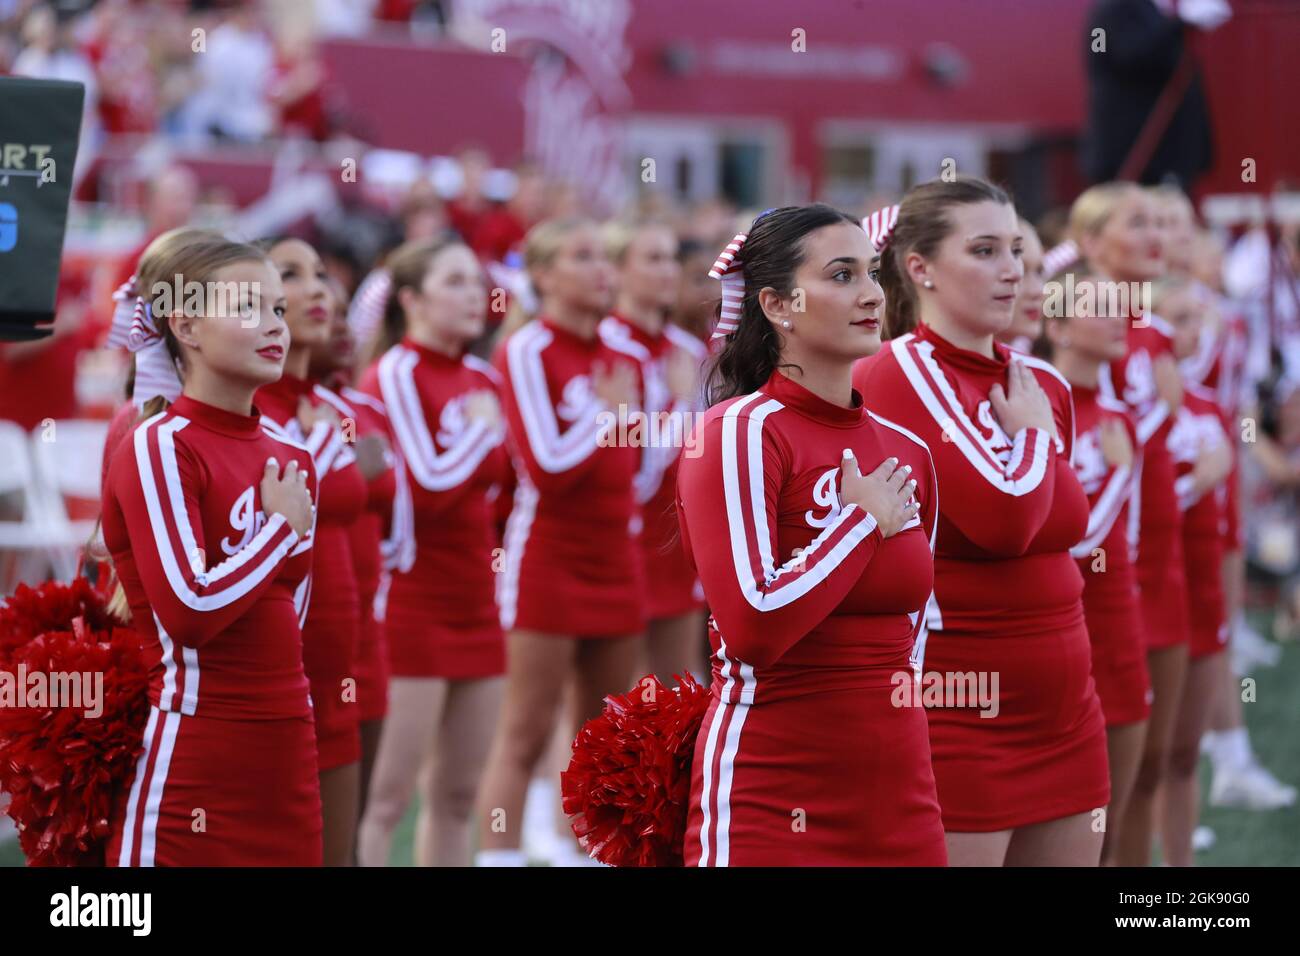 Indiana University cheerleaders place their hands over their hearts during the playing of the national anthem on the anniversary of the 9/11 attack before Indiana University's plays against Idaho during the NCAA football game at Memorial Stadium in Bloomington. The Hoosiers beat the Vandals 56-14. Stock Photo